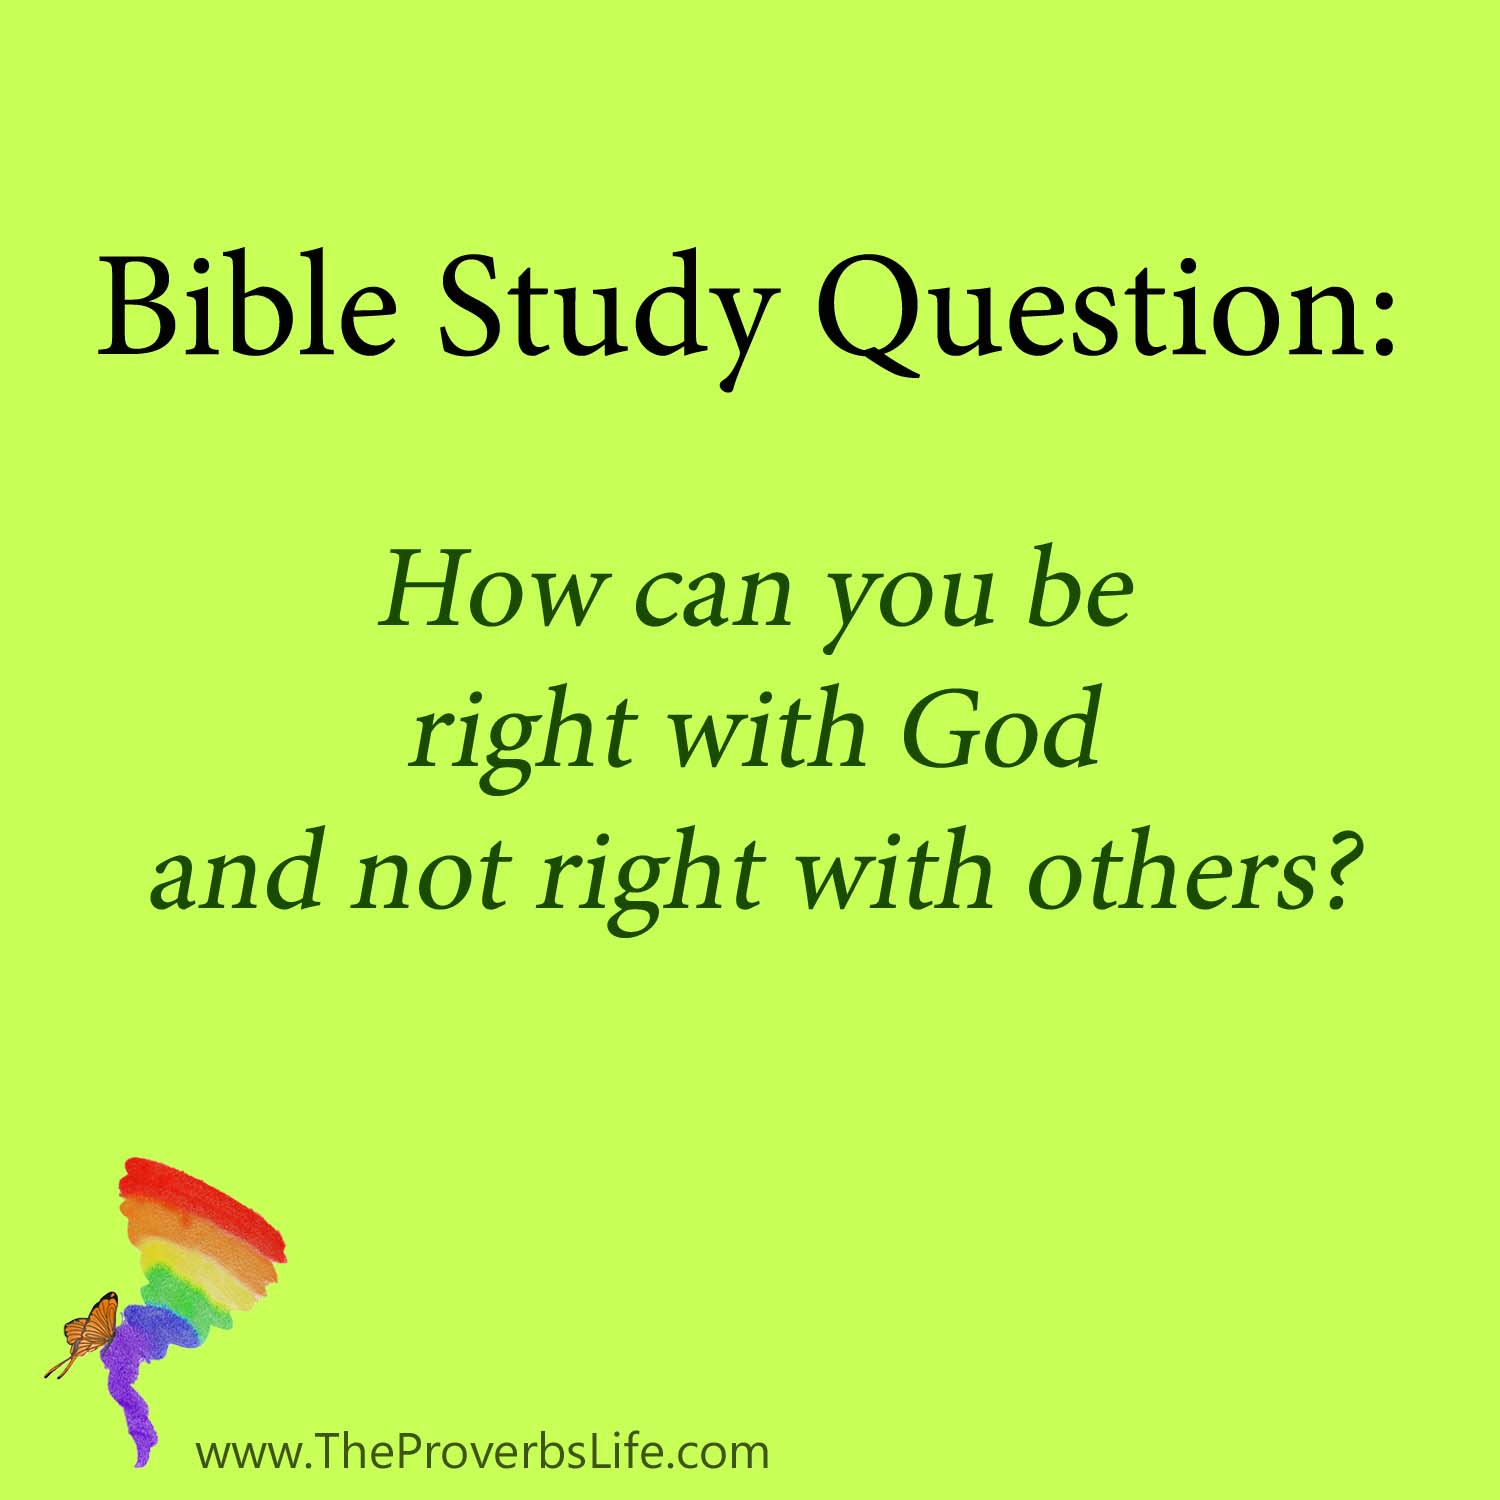 bible study question - right with God